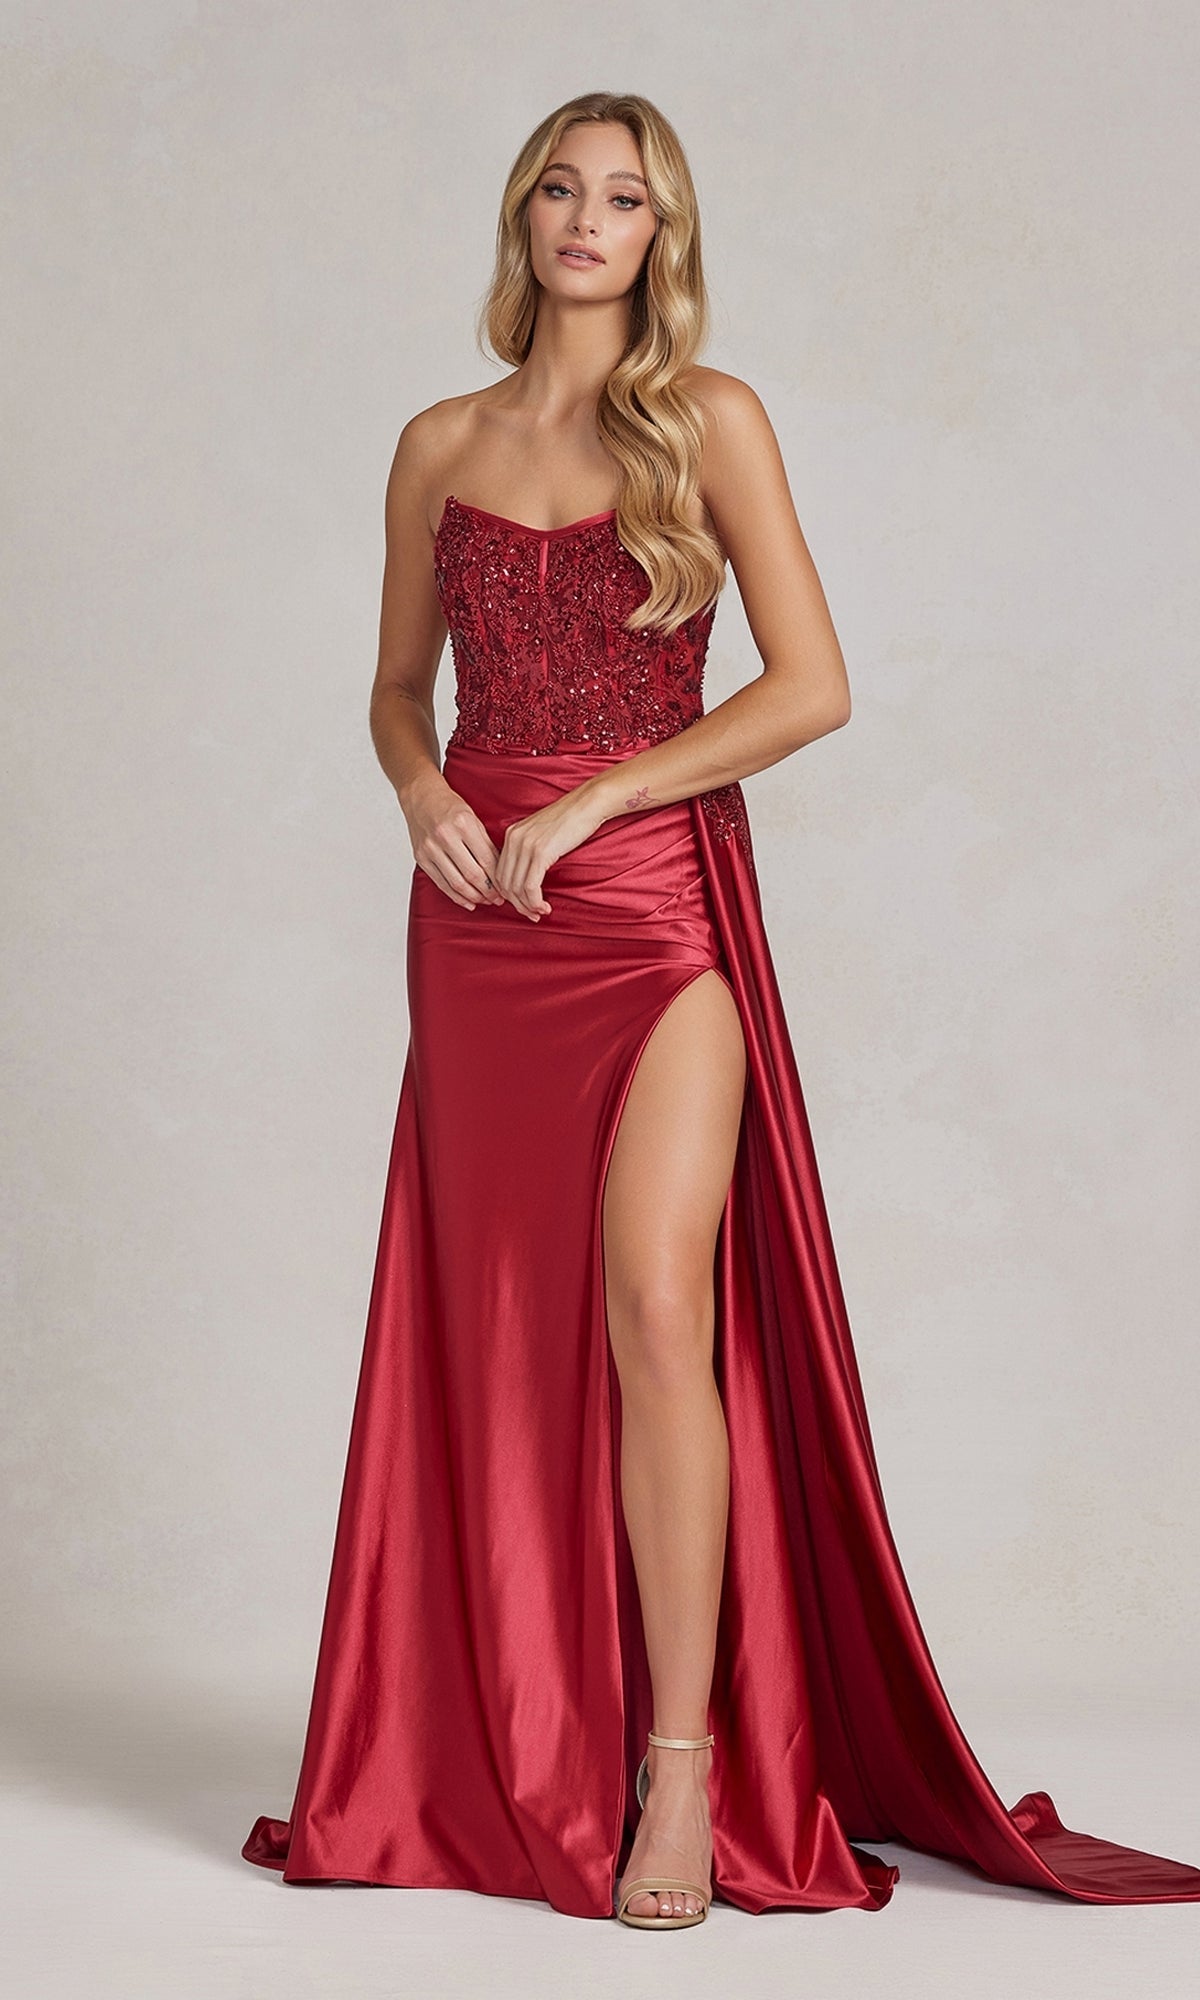 Long Corset Prom Dress with Side Drape - PromGirl